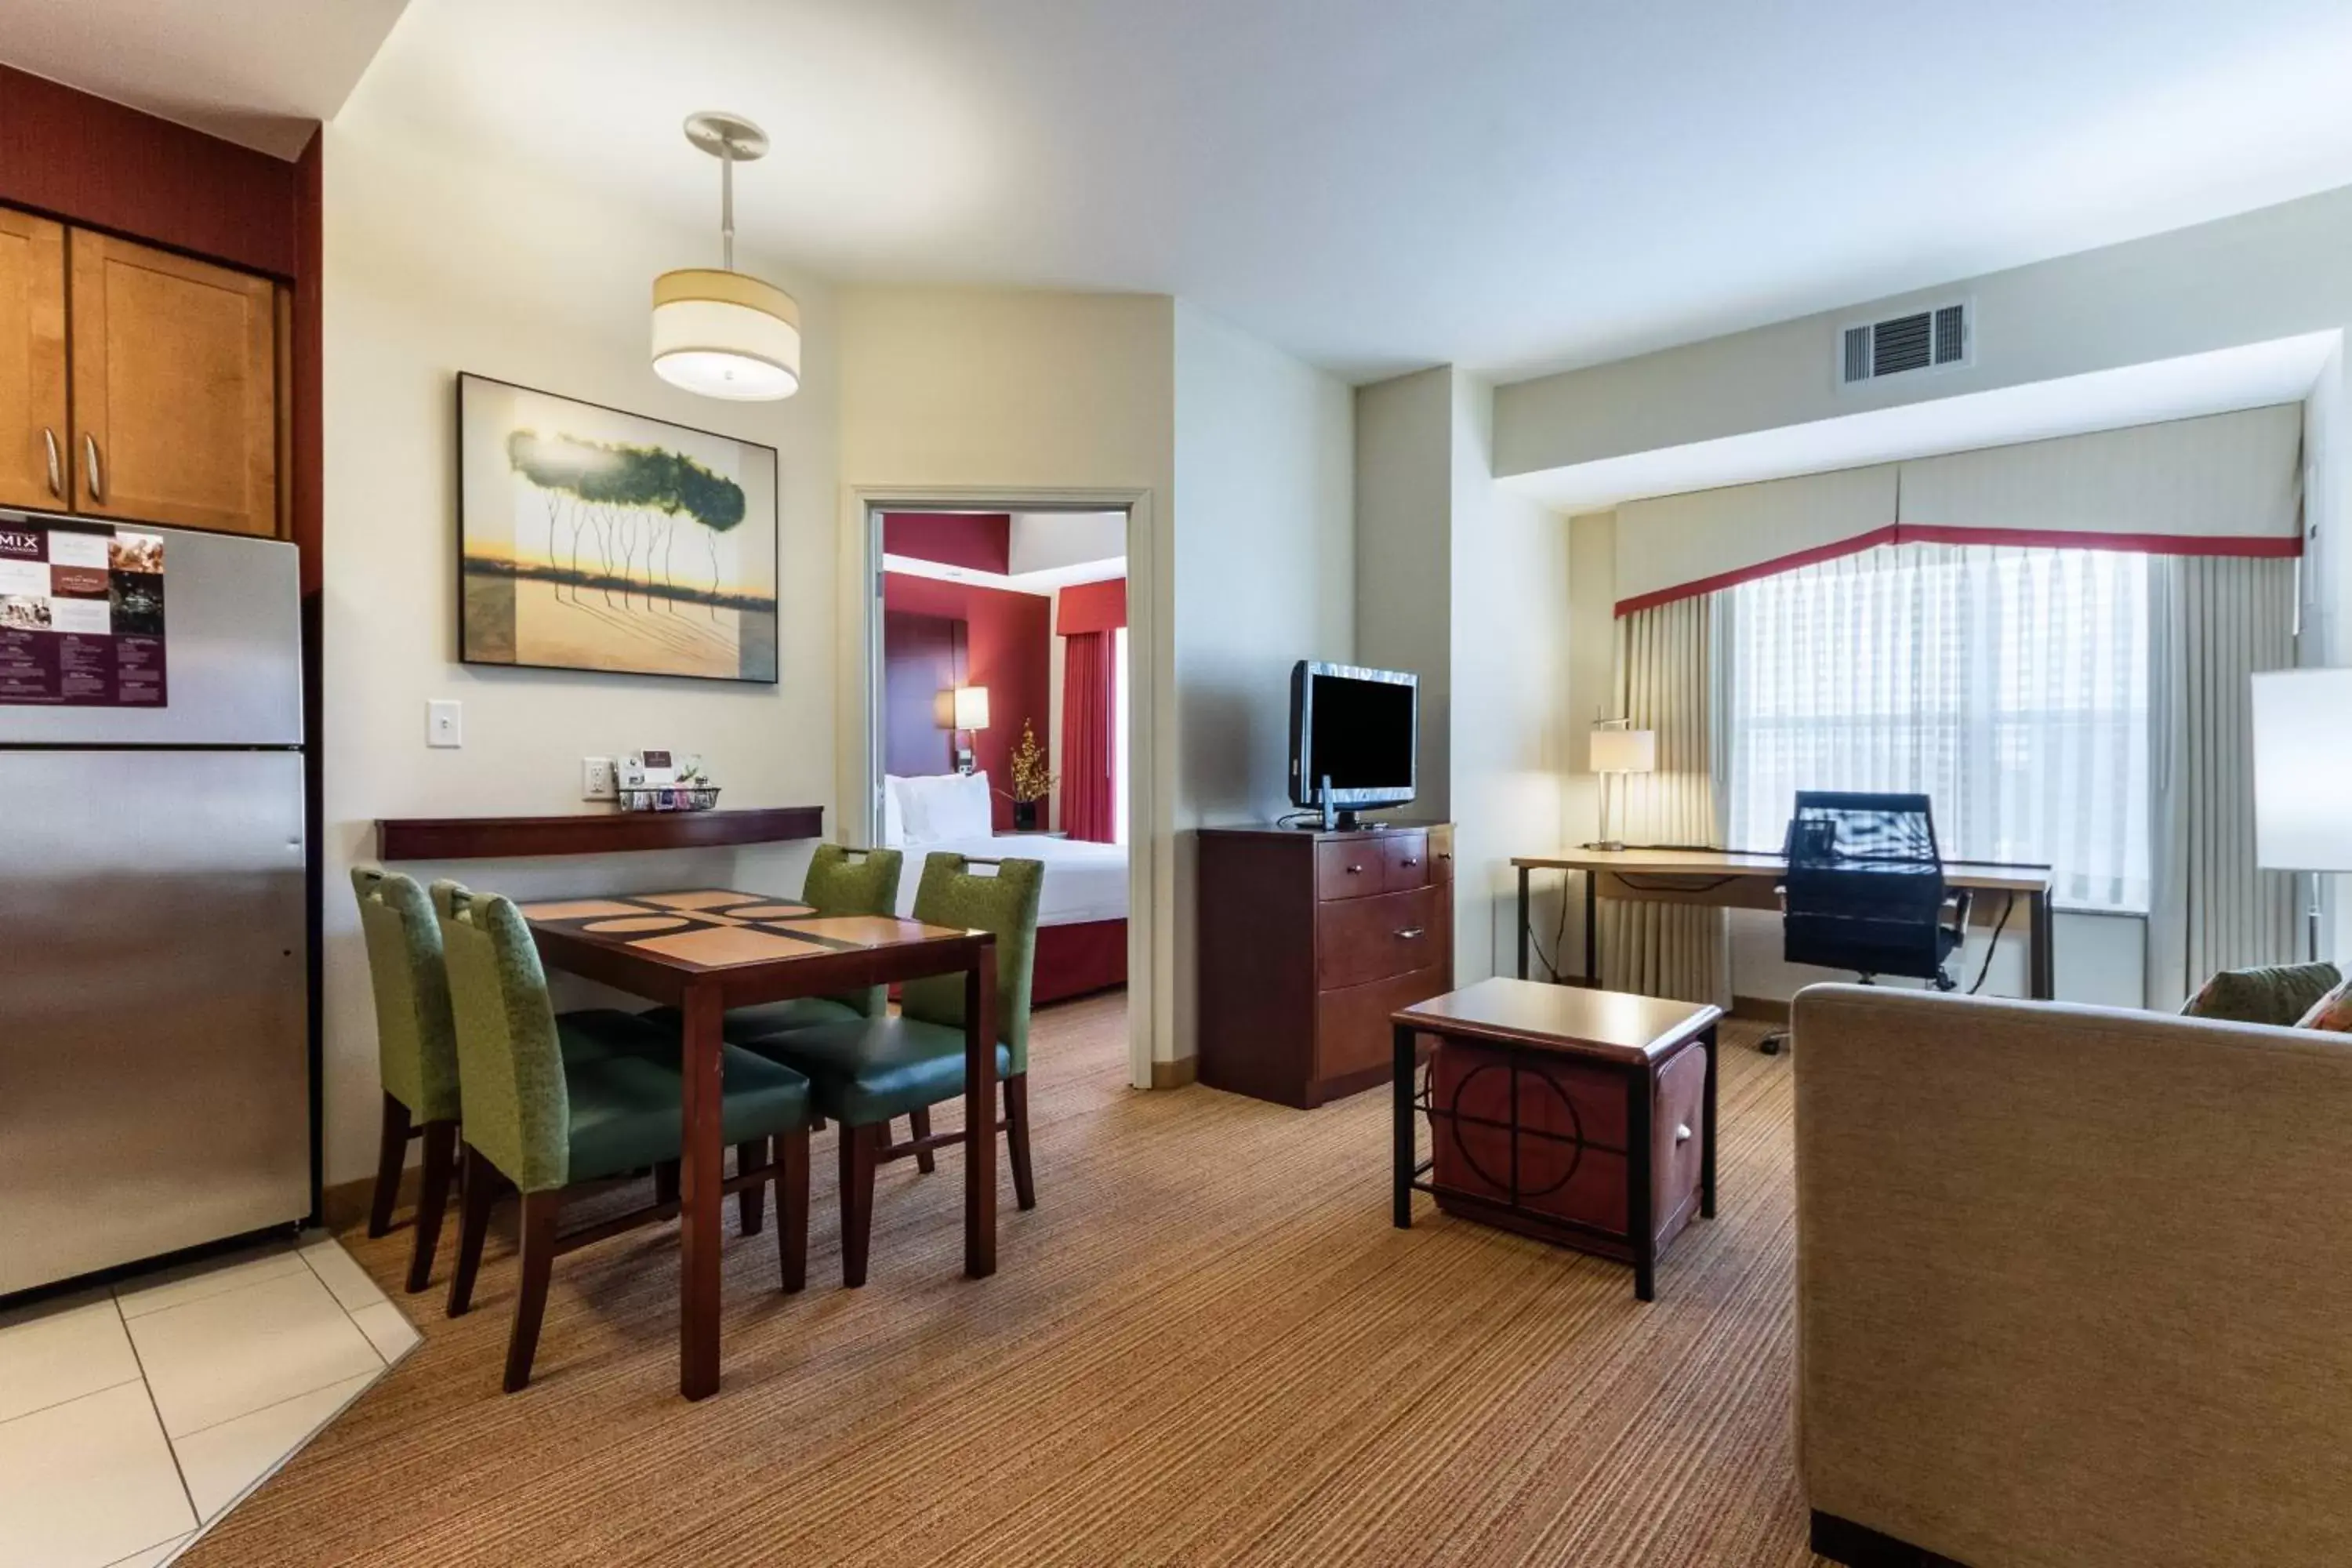 Bedroom, Dining Area in Residence Inn Dallas DFW Airport South/Irving